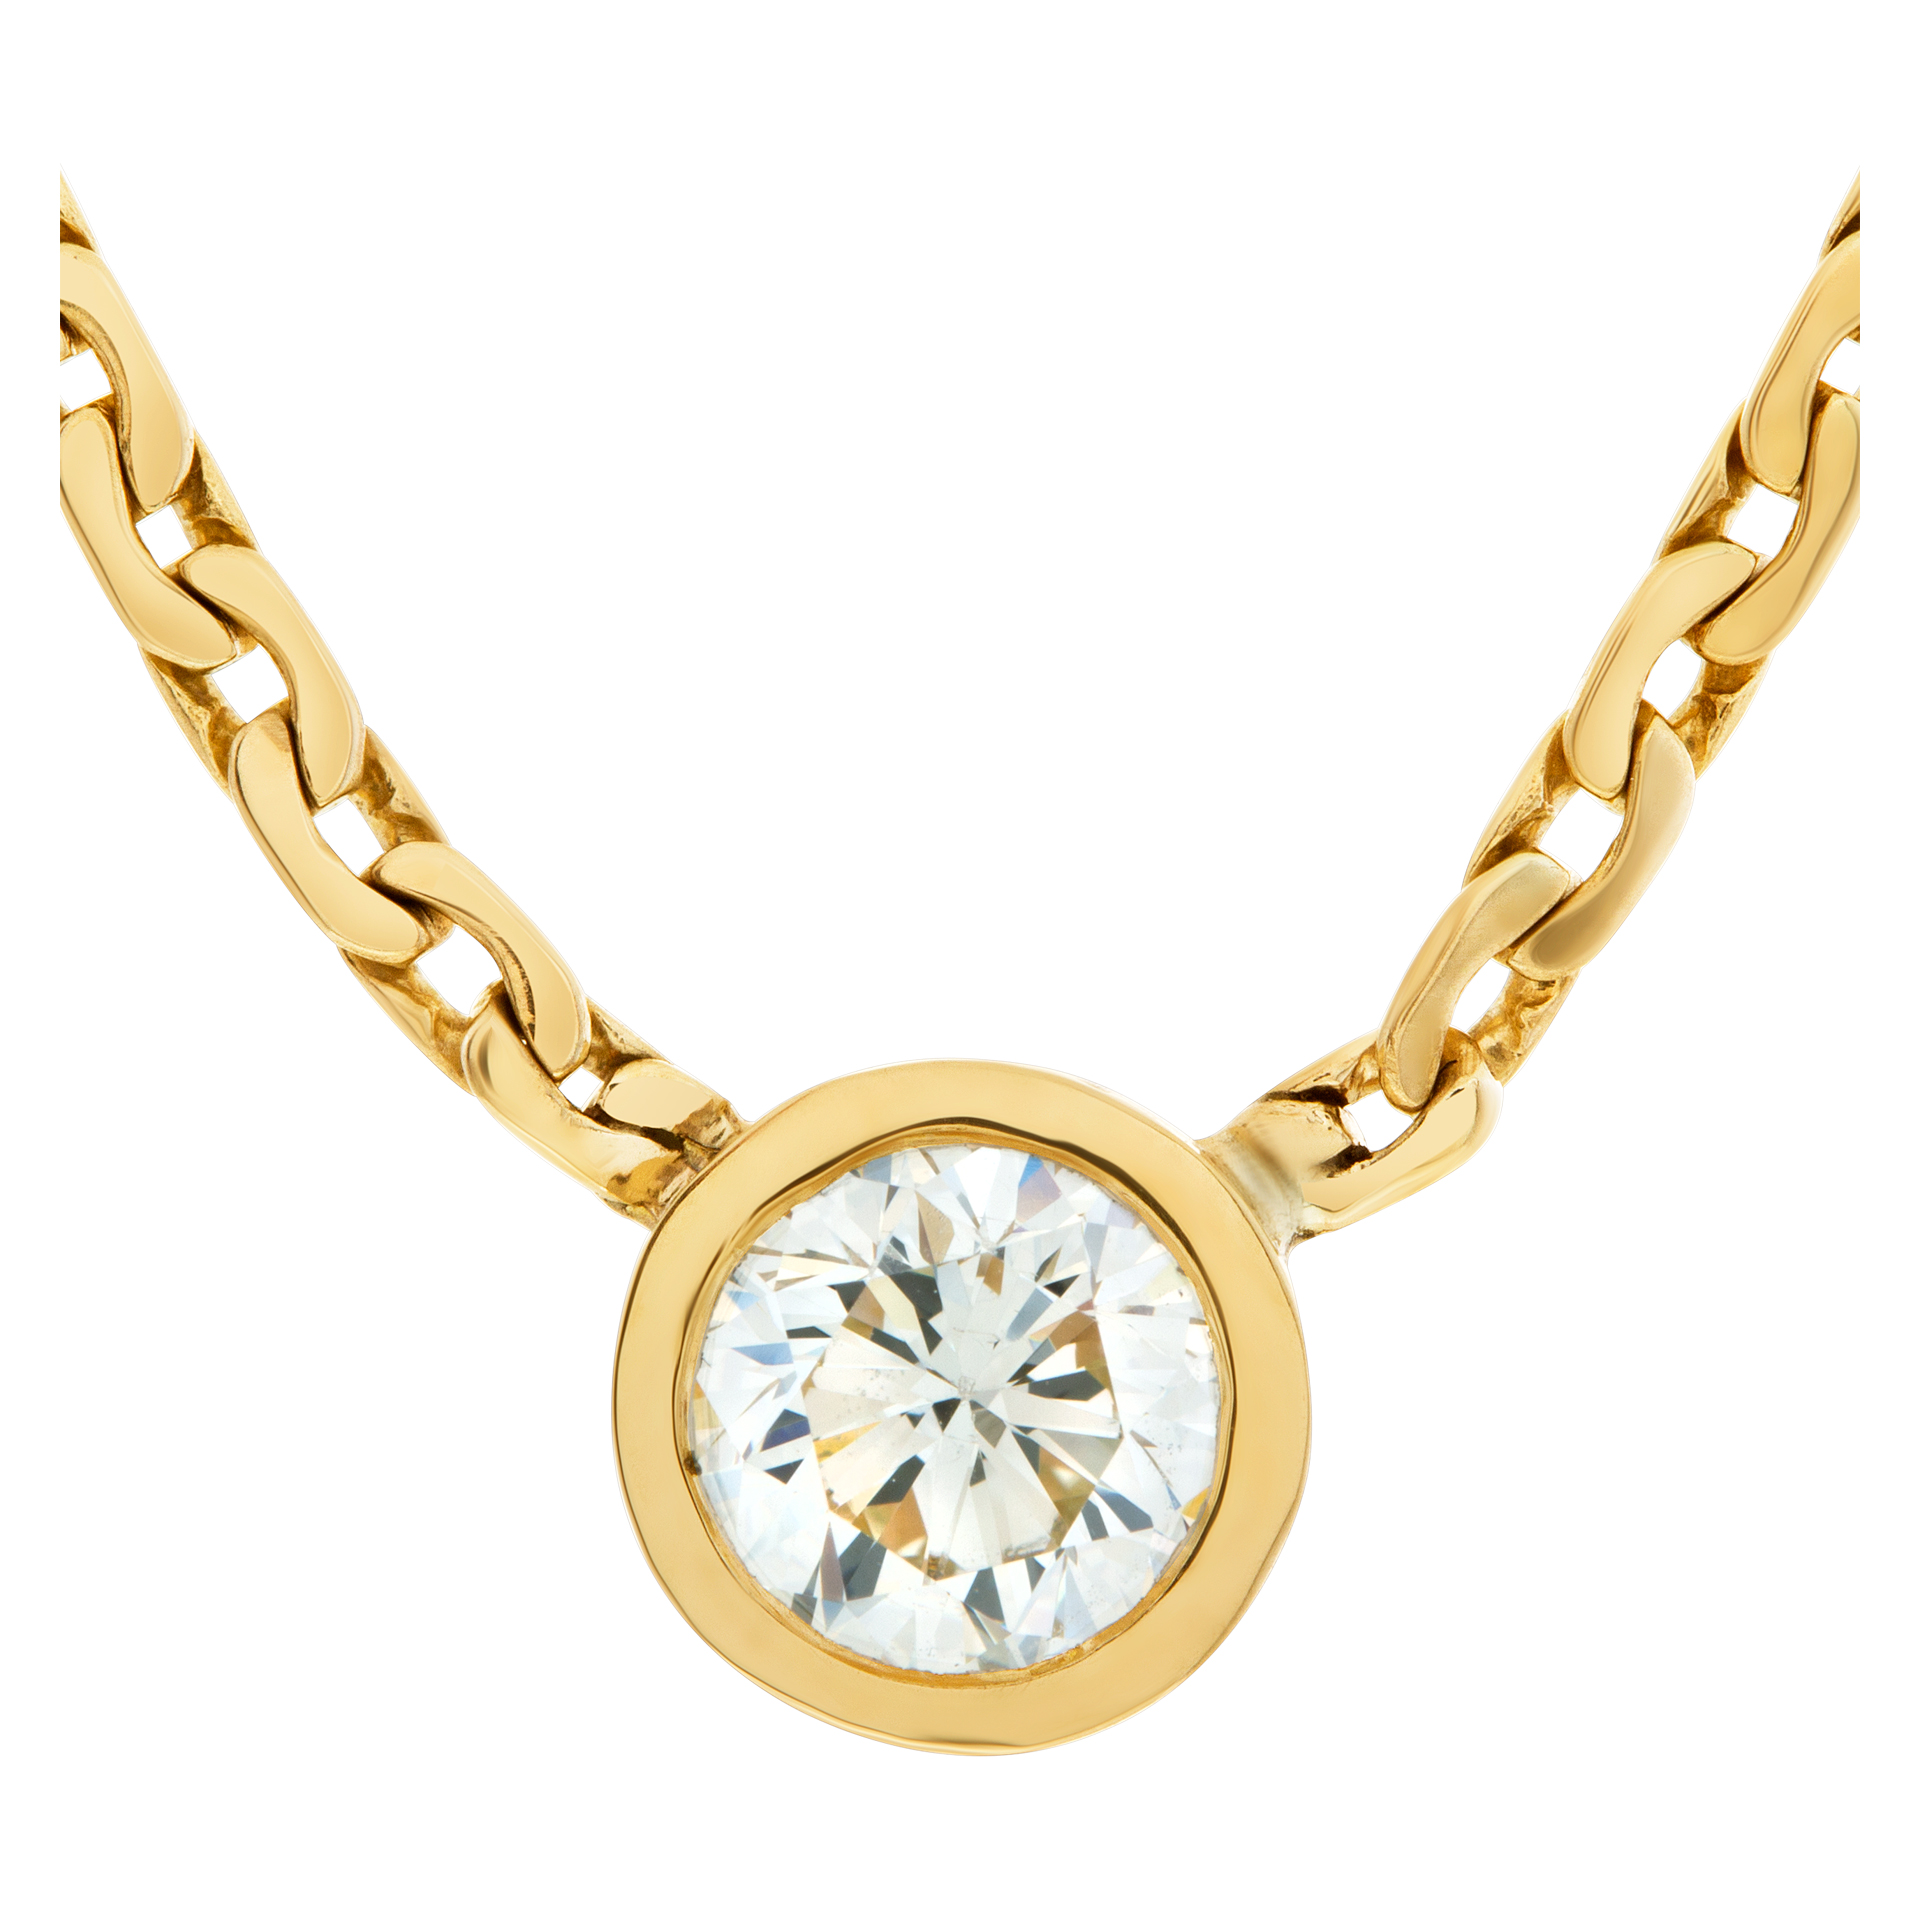 GIA certified round brilliant cut diamond 1.06 (M color, VS1 clarity) necklace in 14k gold. (Stones)